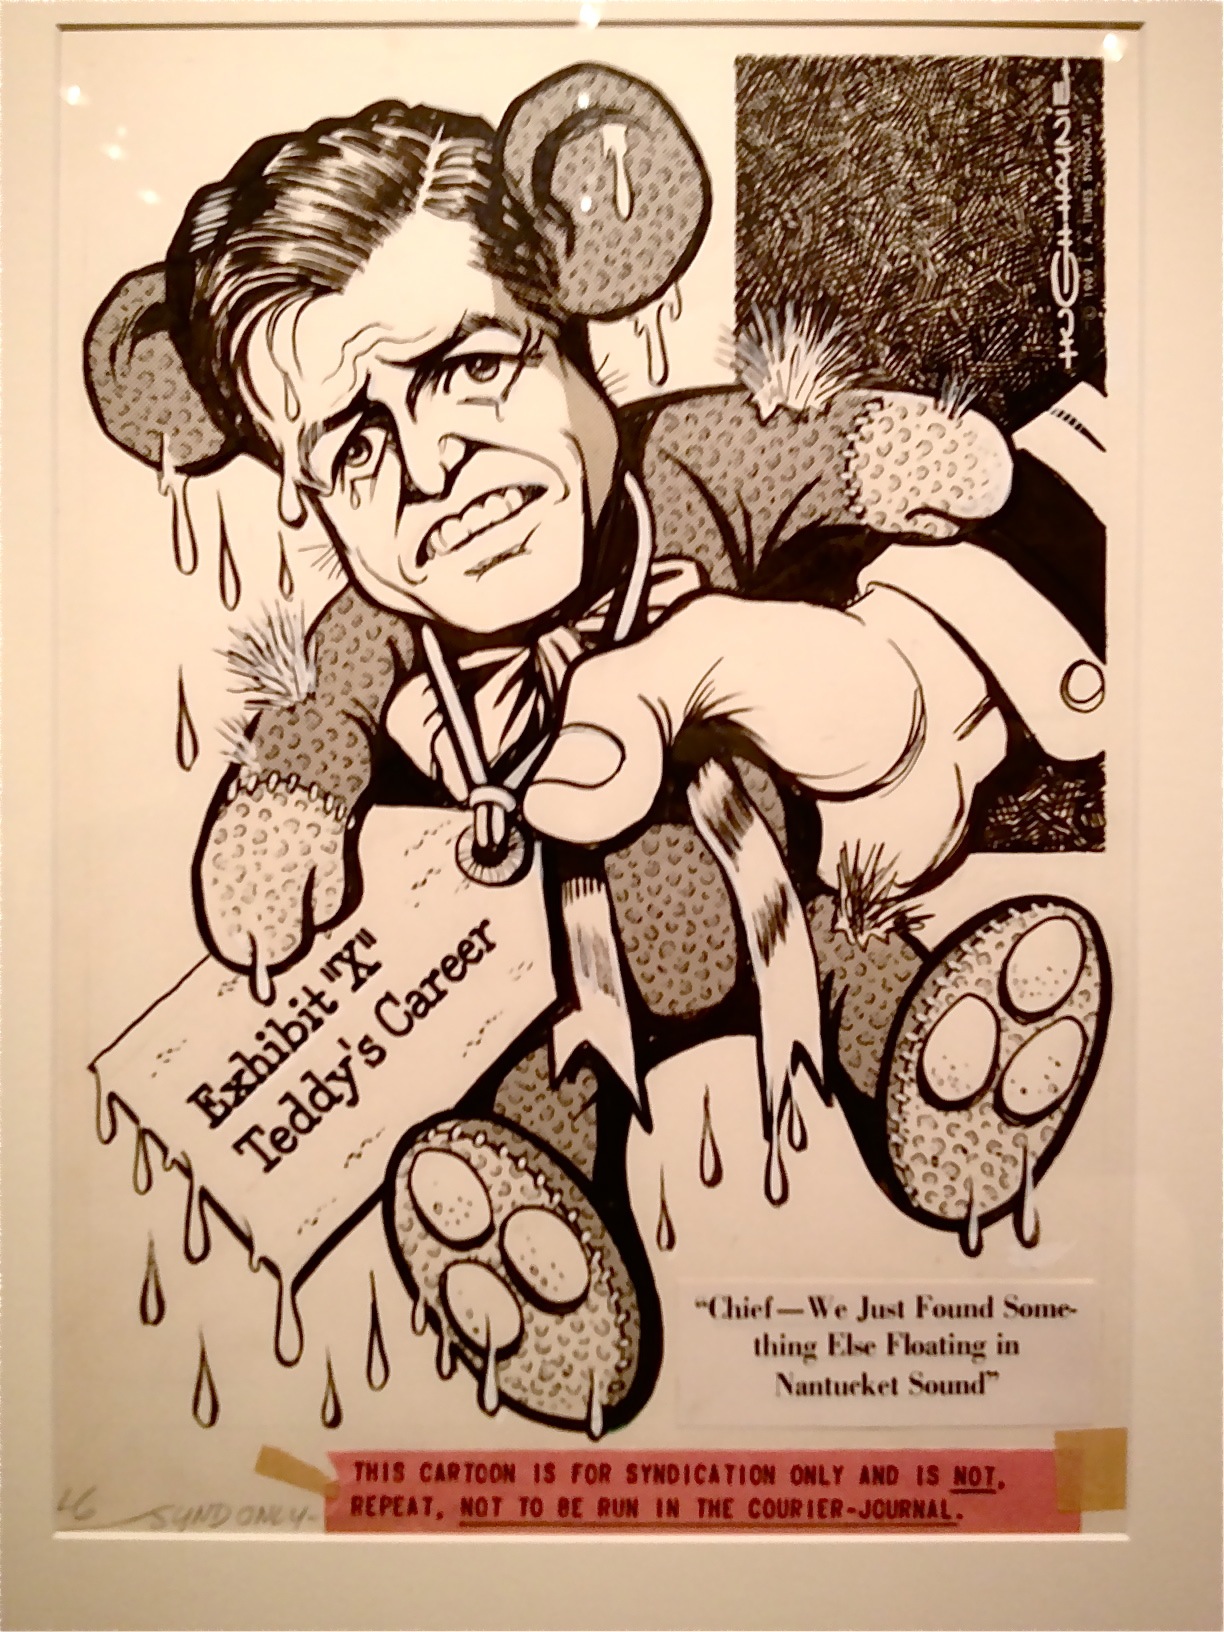 A Hugh Haynie cartoon banned by the Courier-Journal publisher in 1969